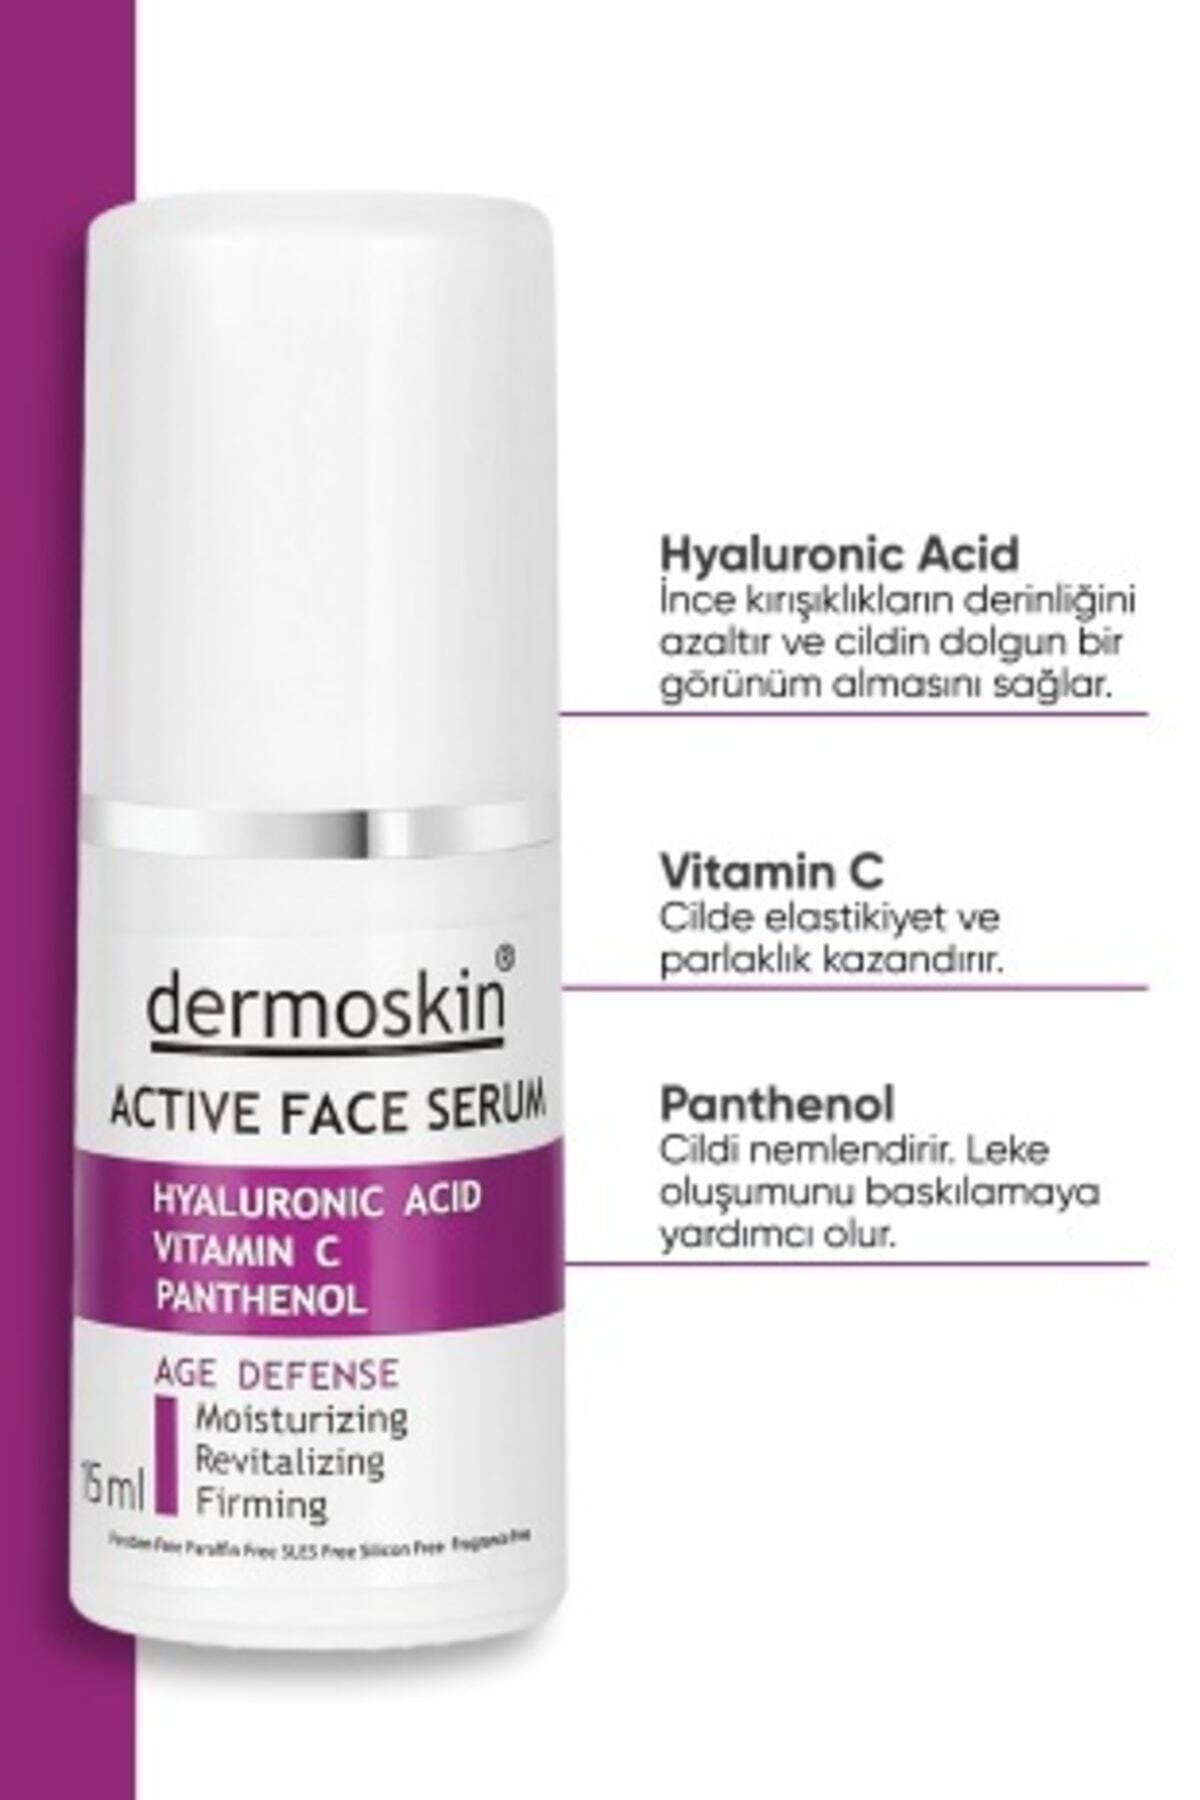 Dermoskin ANTİ-WRİNKLE SERUM THAT GİVES ELASTİCİTY TO THE SKİN 15 ML DEMBA1494